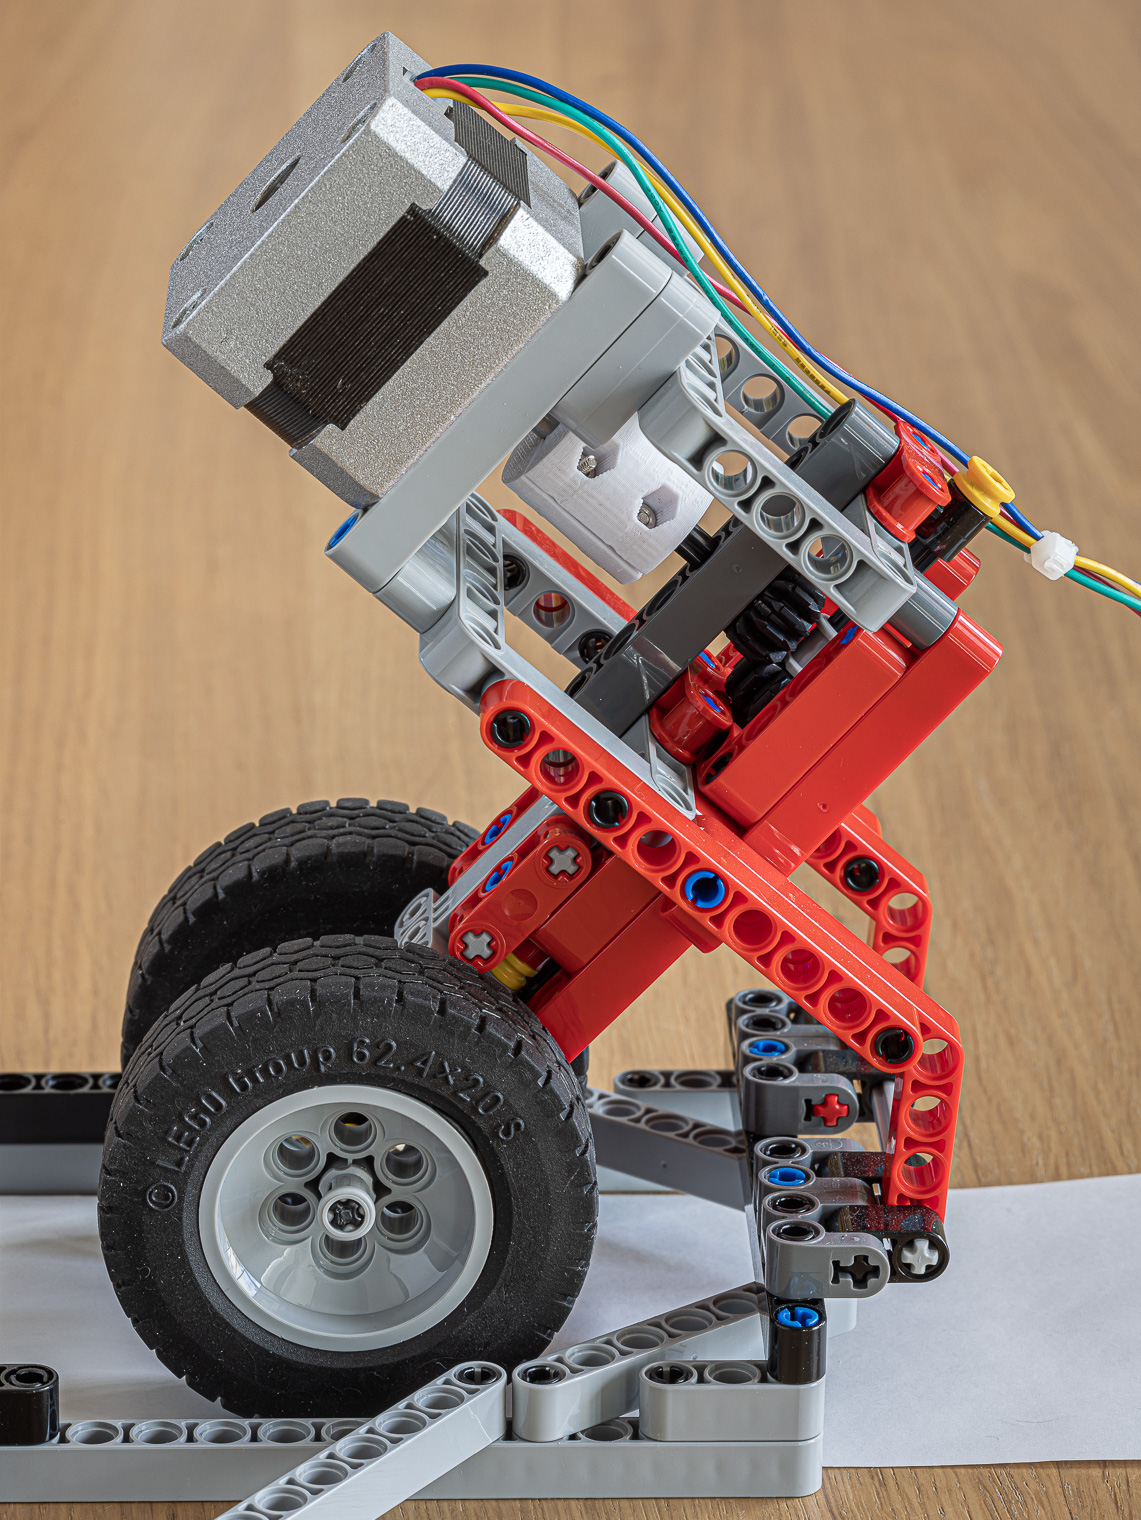 close-up photograph of the motor-feeder lego assembly